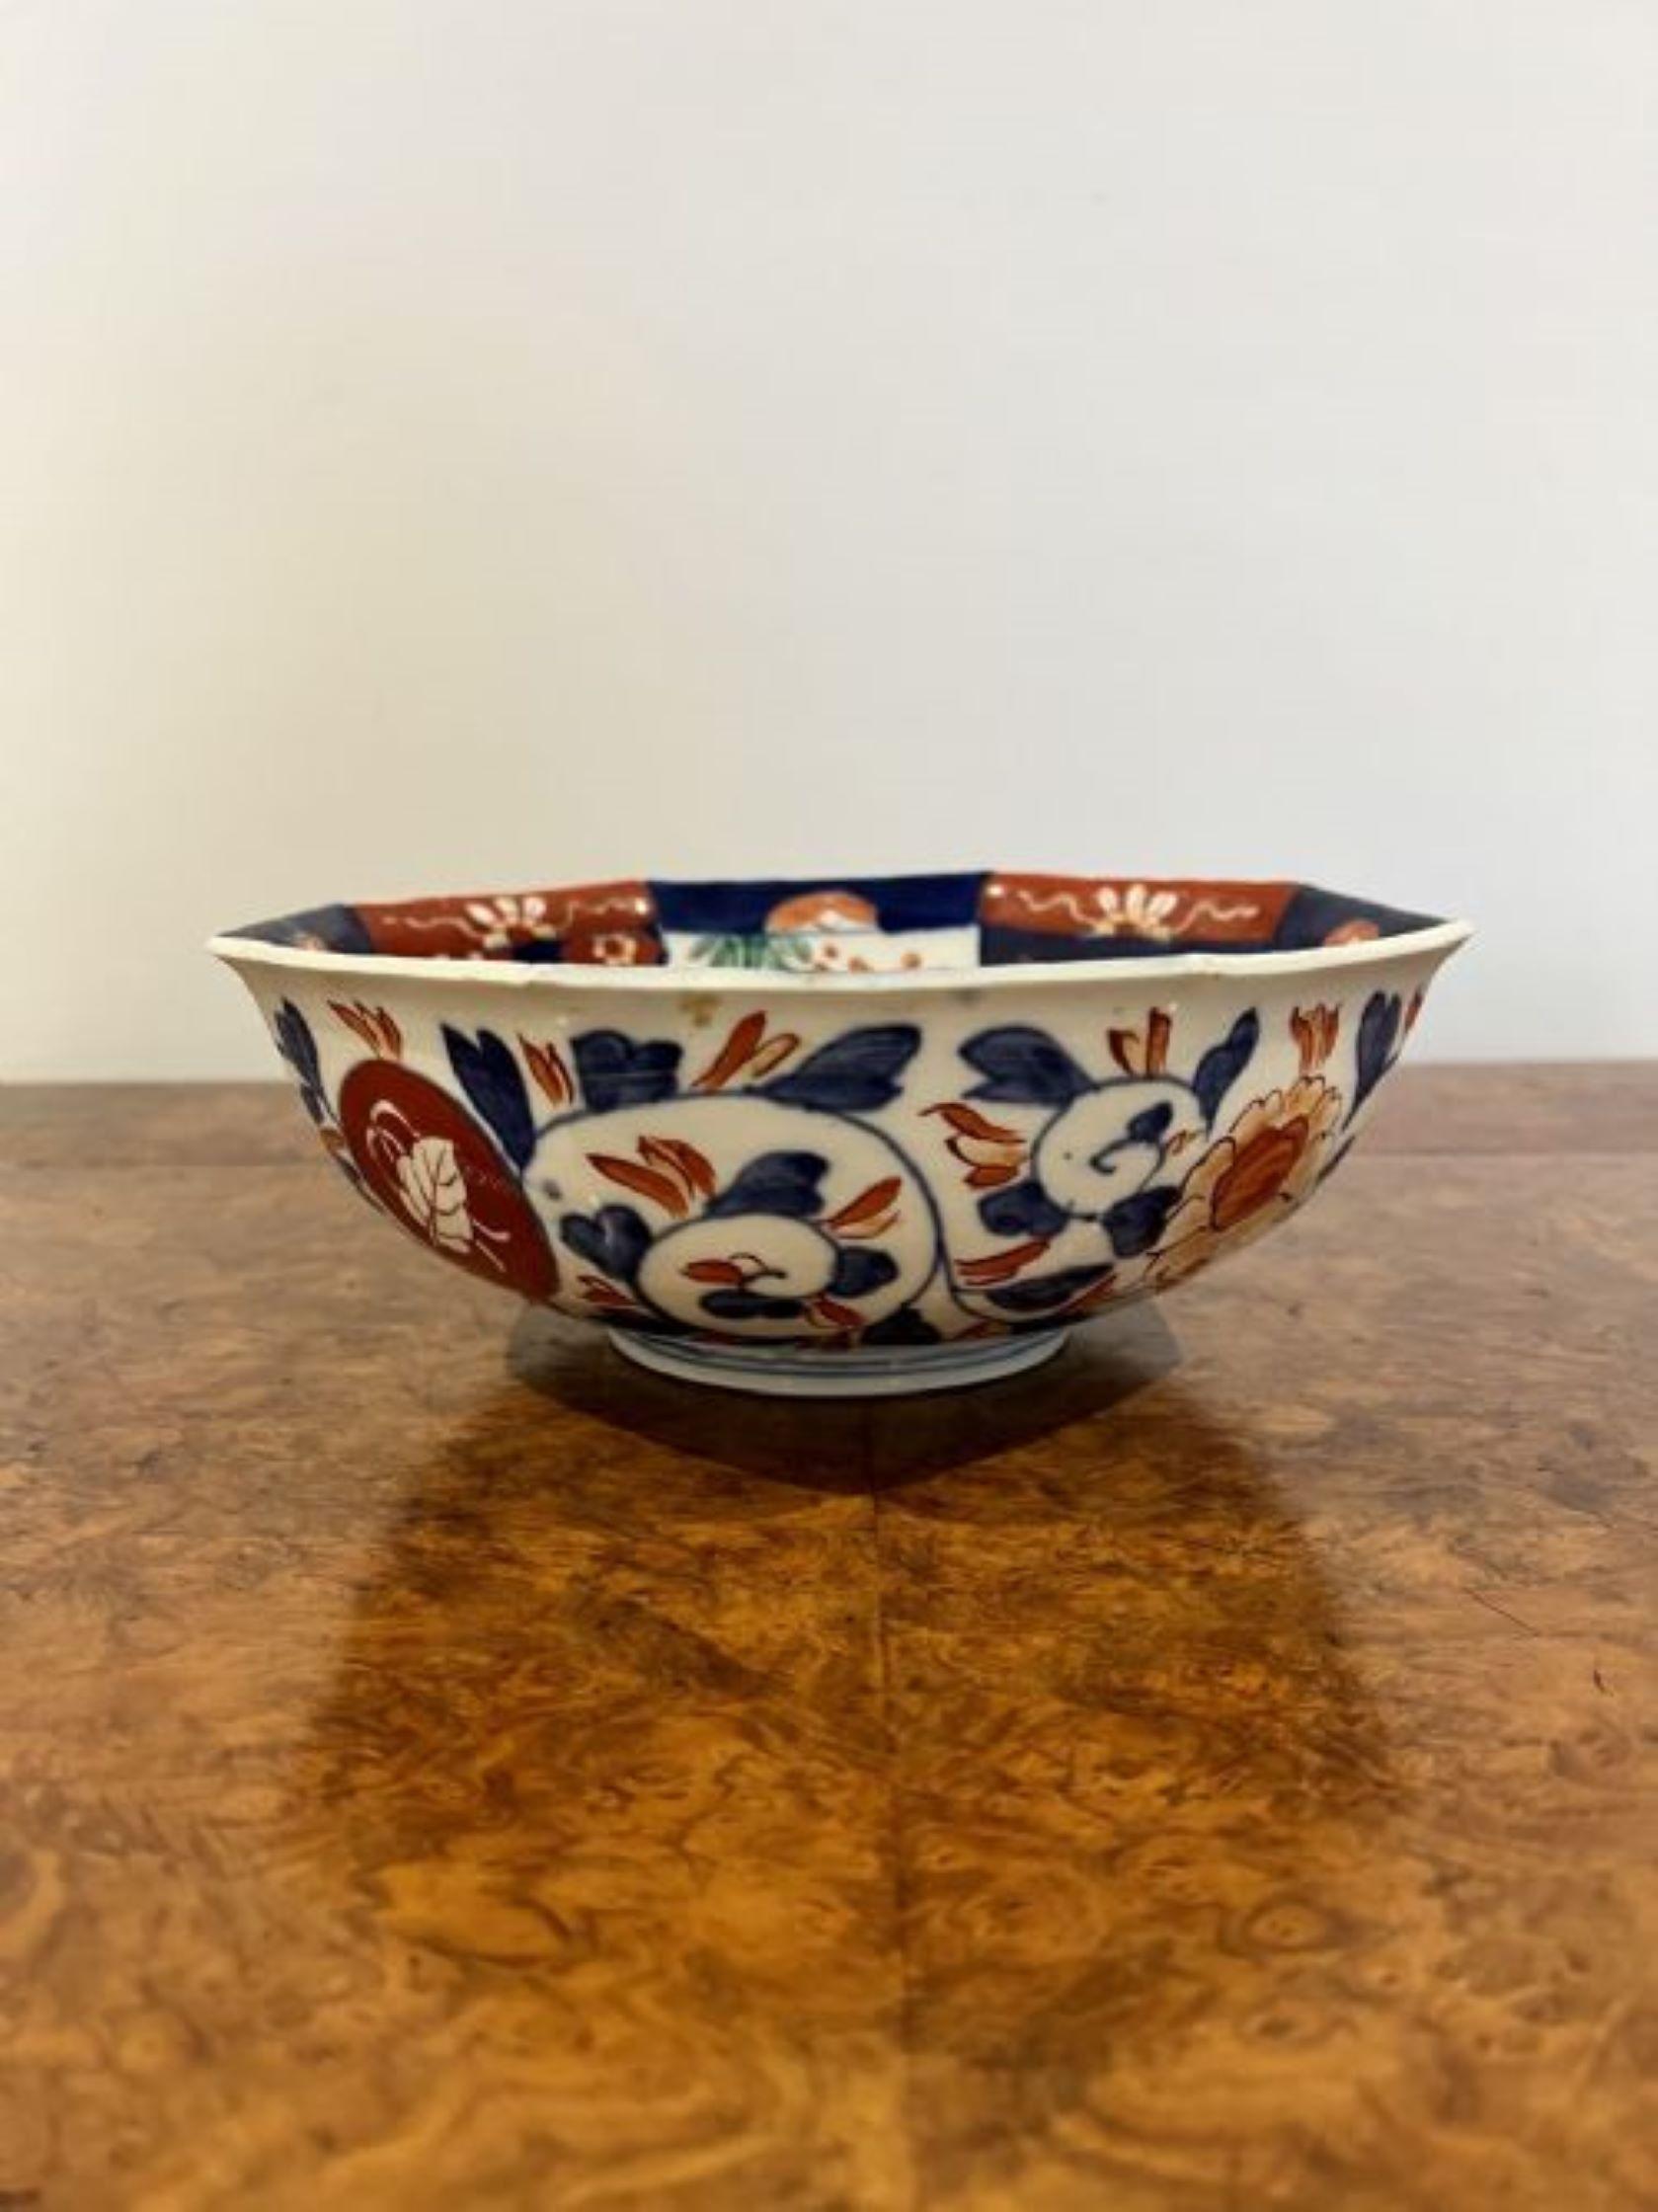 Quality antique Japanese hexagonal shaped imari bowl having having a quality antique Japanese hexagonal shaped imari bowl decorated with flowers, leaves and scrolls in wonderful hand painted red, blue, green and white colours. 